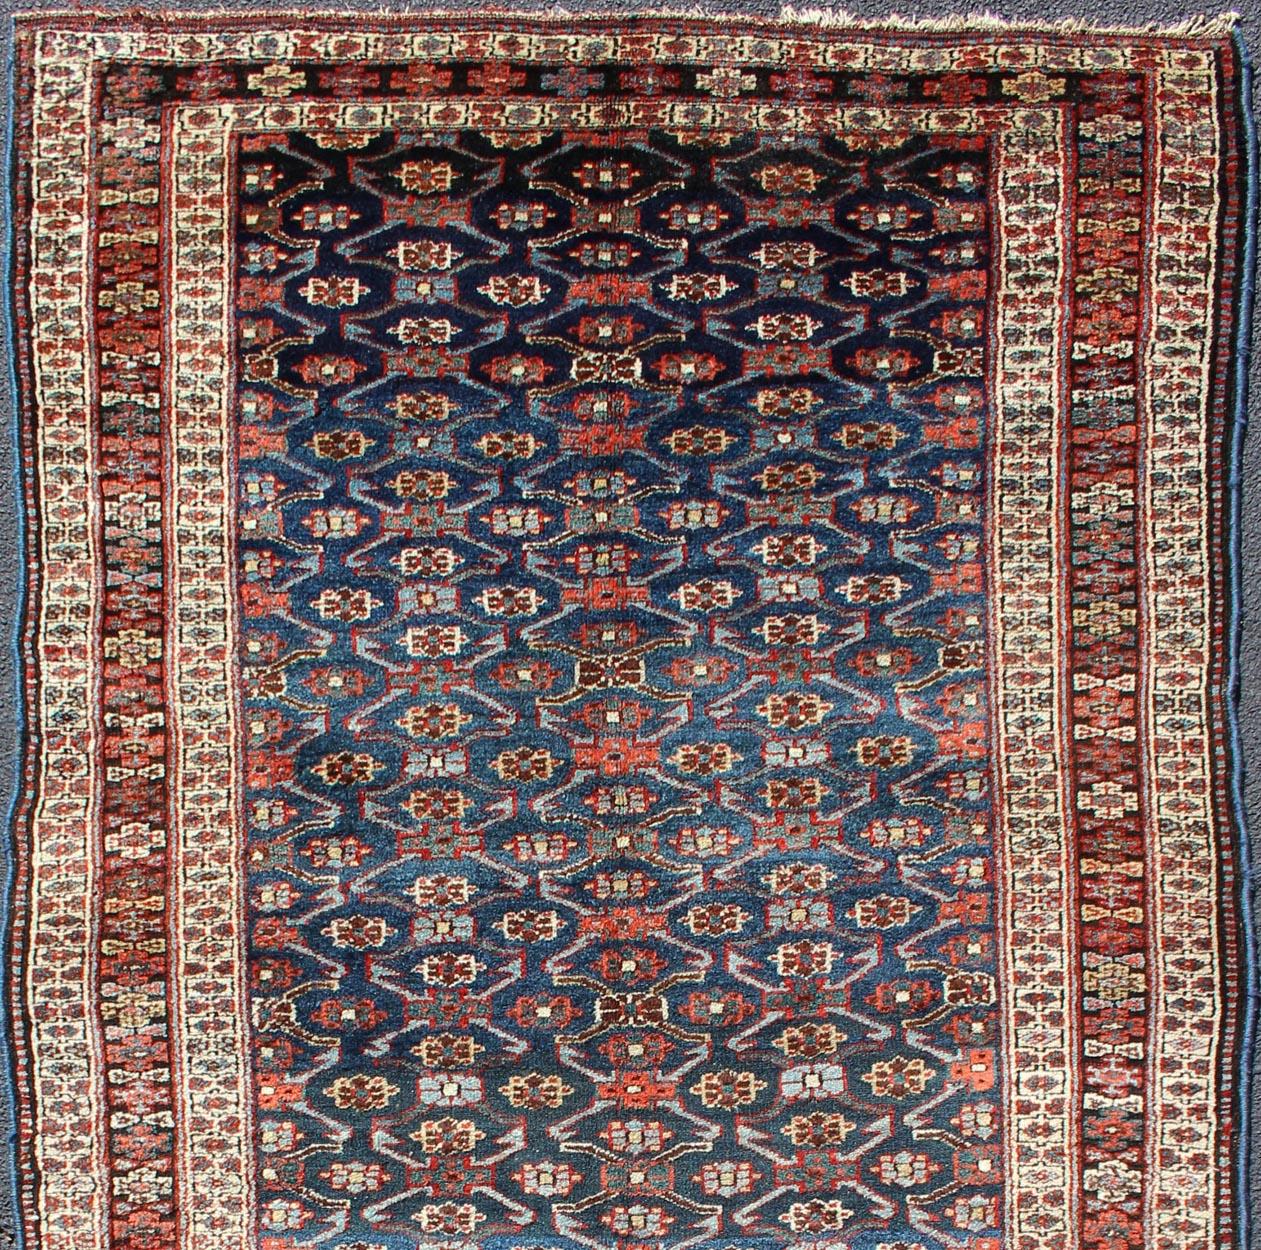 Antique Runner from Persia with geometric design in gray blue background, cream and brown border, with accent colors of red, blue, green and Light blue, rug 19-0808, country of origin / type: Iran / Kurdish, circa 1900.

This Kurdish carpet from